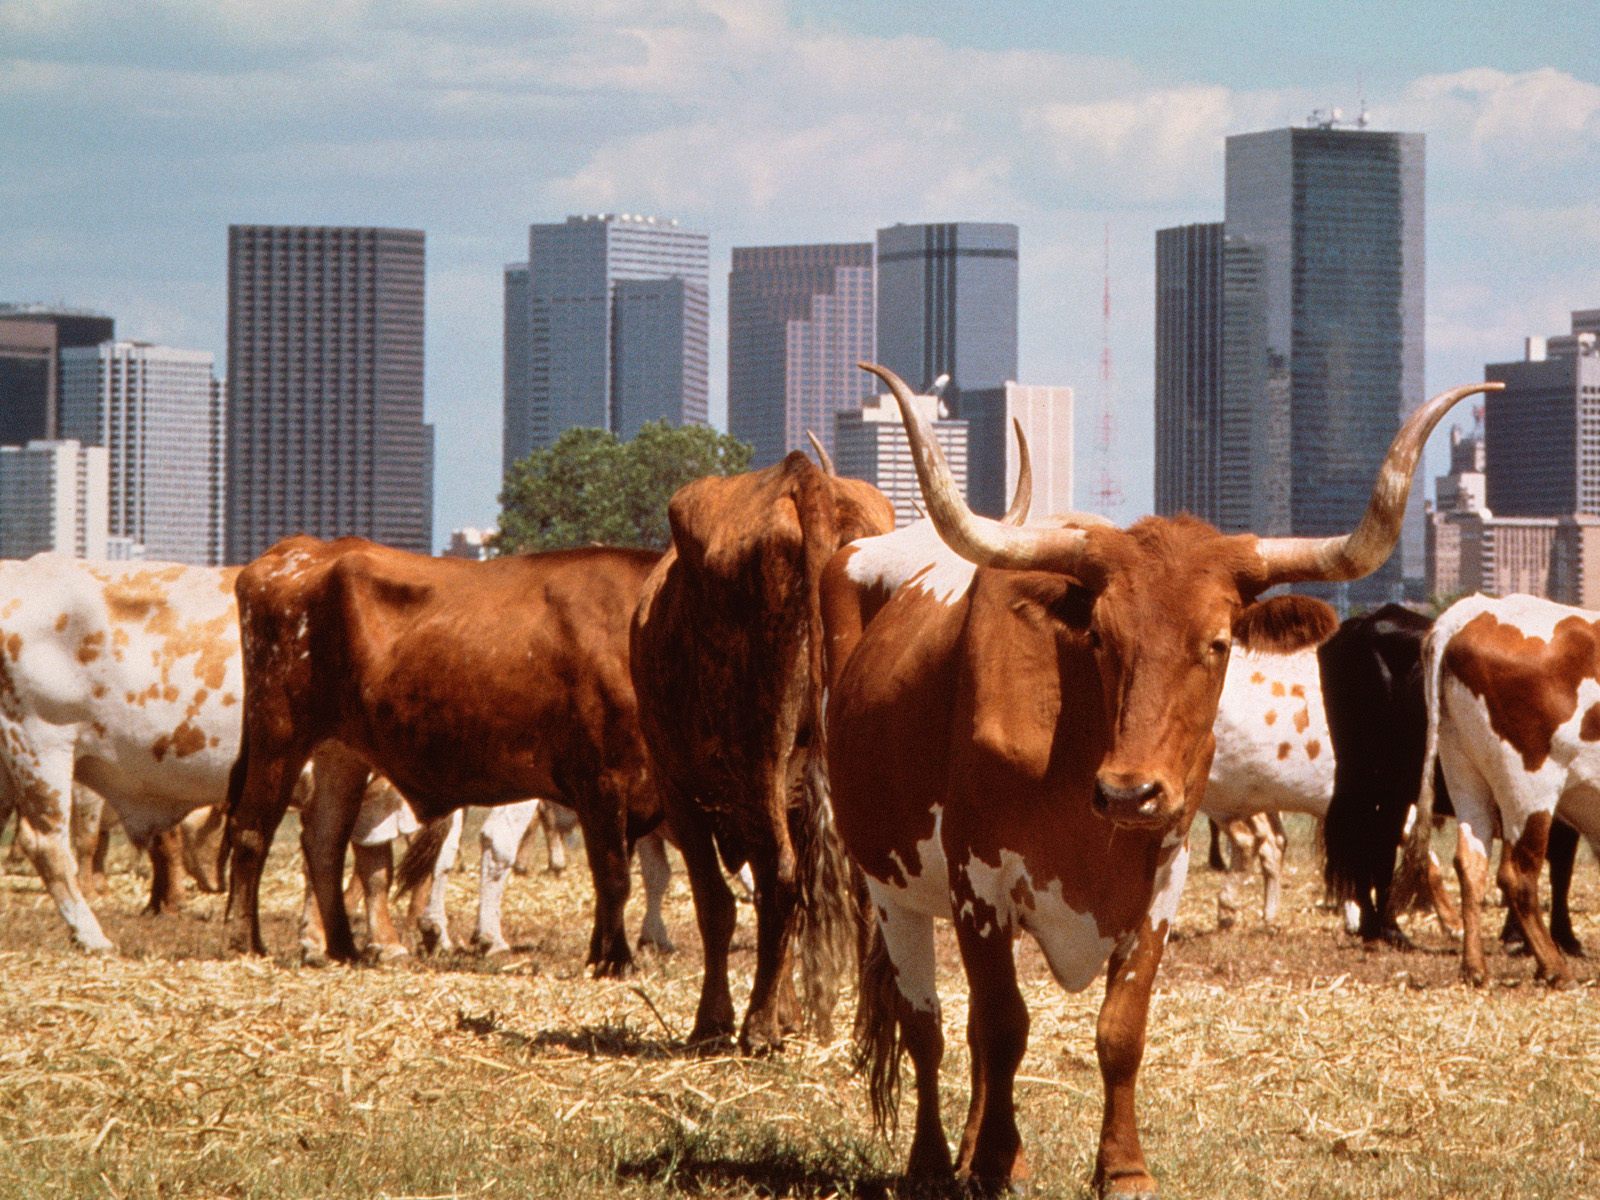 Wallpaper Animals At Dallas Texas Cattles Near The City Pictures